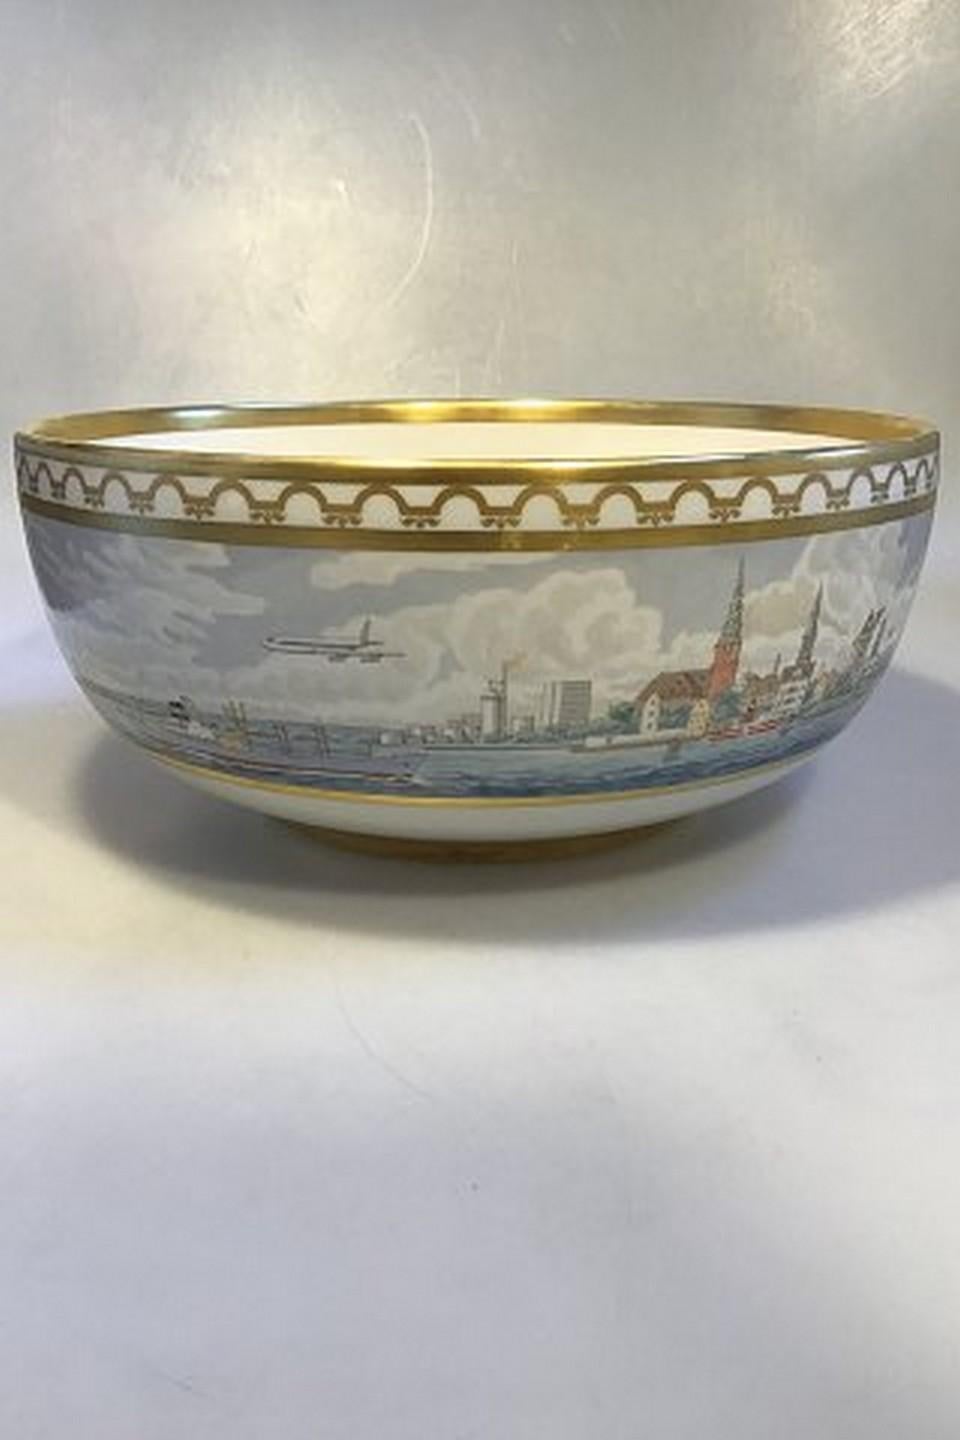 Royal Copenhagen Commemorative bowl 1775-1975 No 749/2500 bowl decorated in colour and gold Scenery of Copenhagen 1775-1975 200th anniversary of Royal Copenhagen Measures Height 15 cm(5 29/32 in) diameter 33 cm(13 in) 1st quality Year of issue 1975